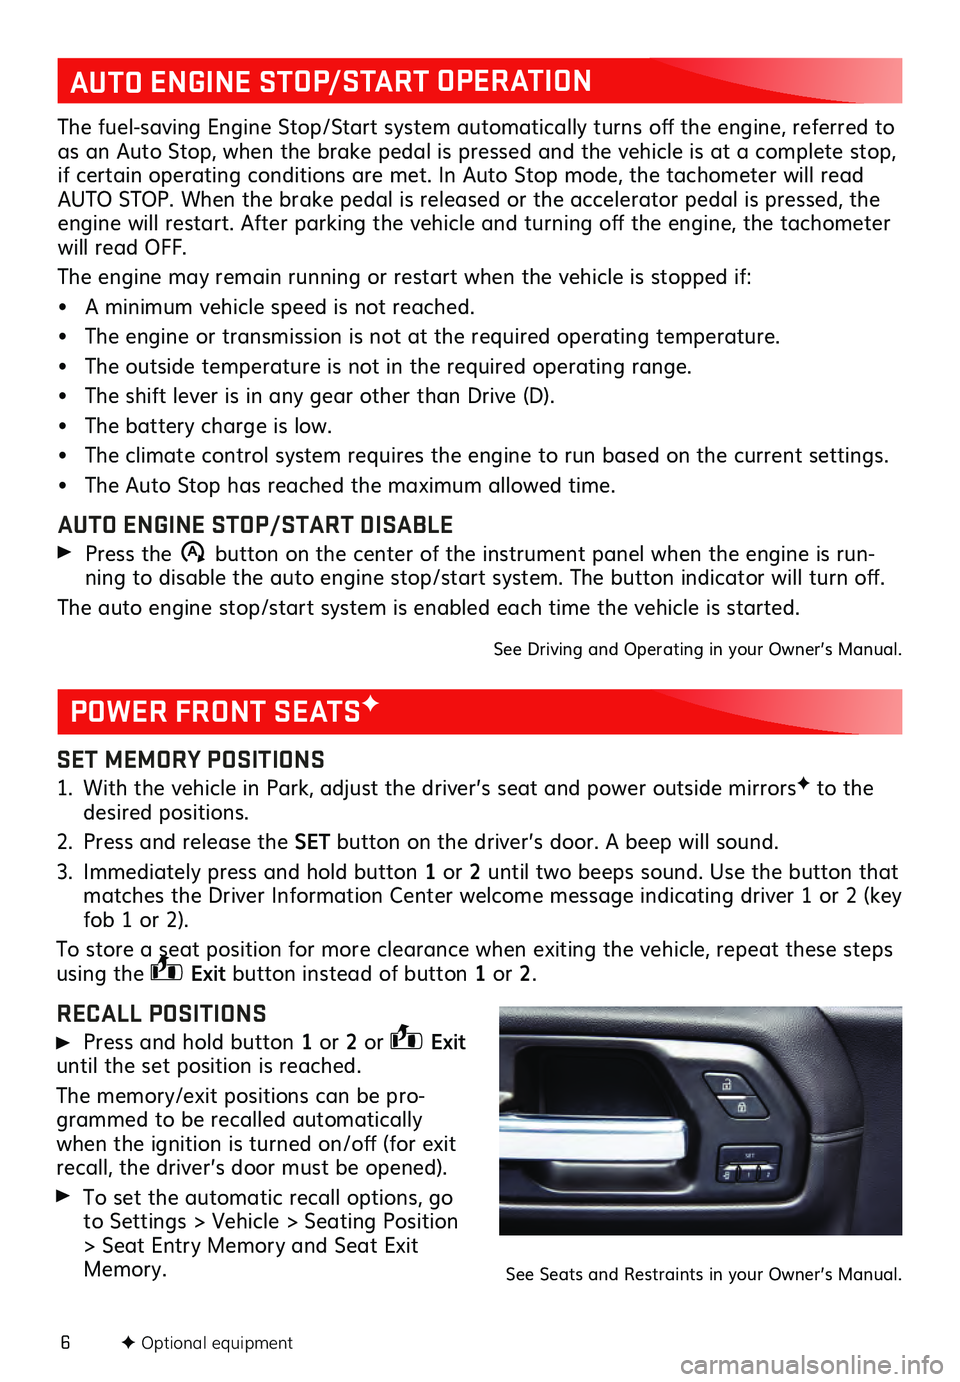 GMC SIERRA 2021  Get To Know Guide 6
SET MEMORY POSITIONS
1. With the vehicle in Park, adjust the driver’s seat and power outside mirrorsF to the desired  positions. 
2. Press and release the SET button on the driver’s door. A beep